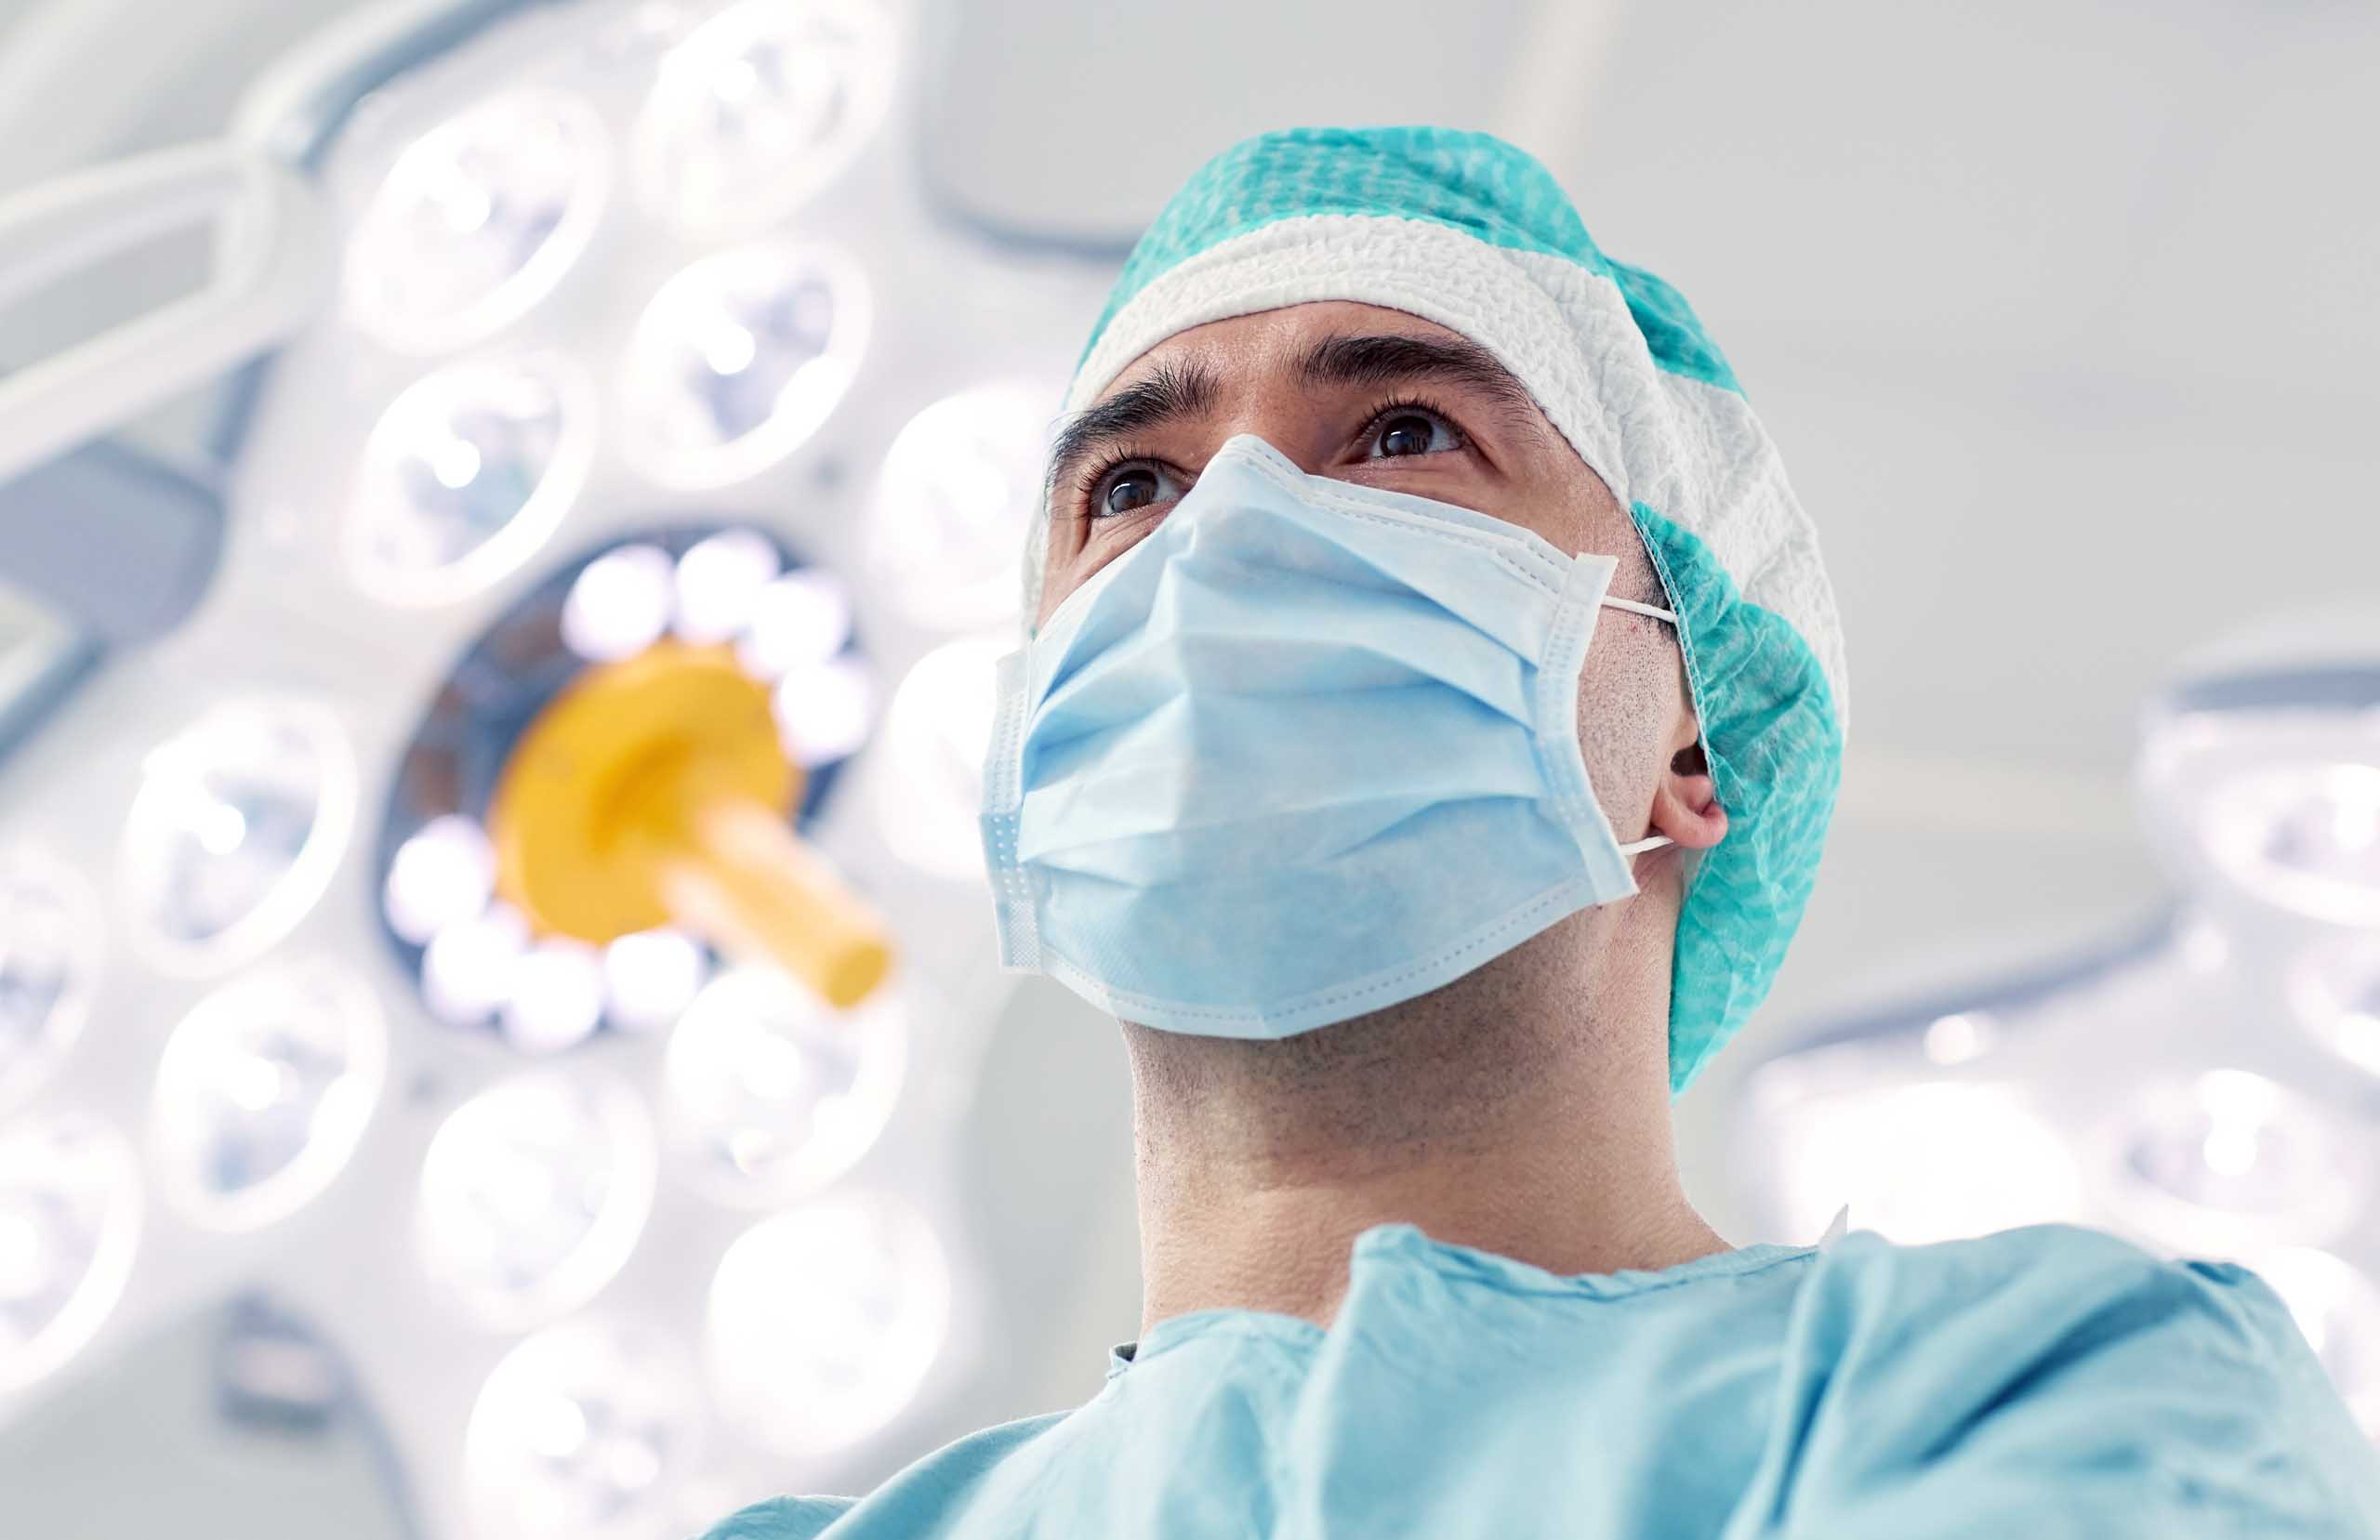 male surgeon in an operating room with bright lights